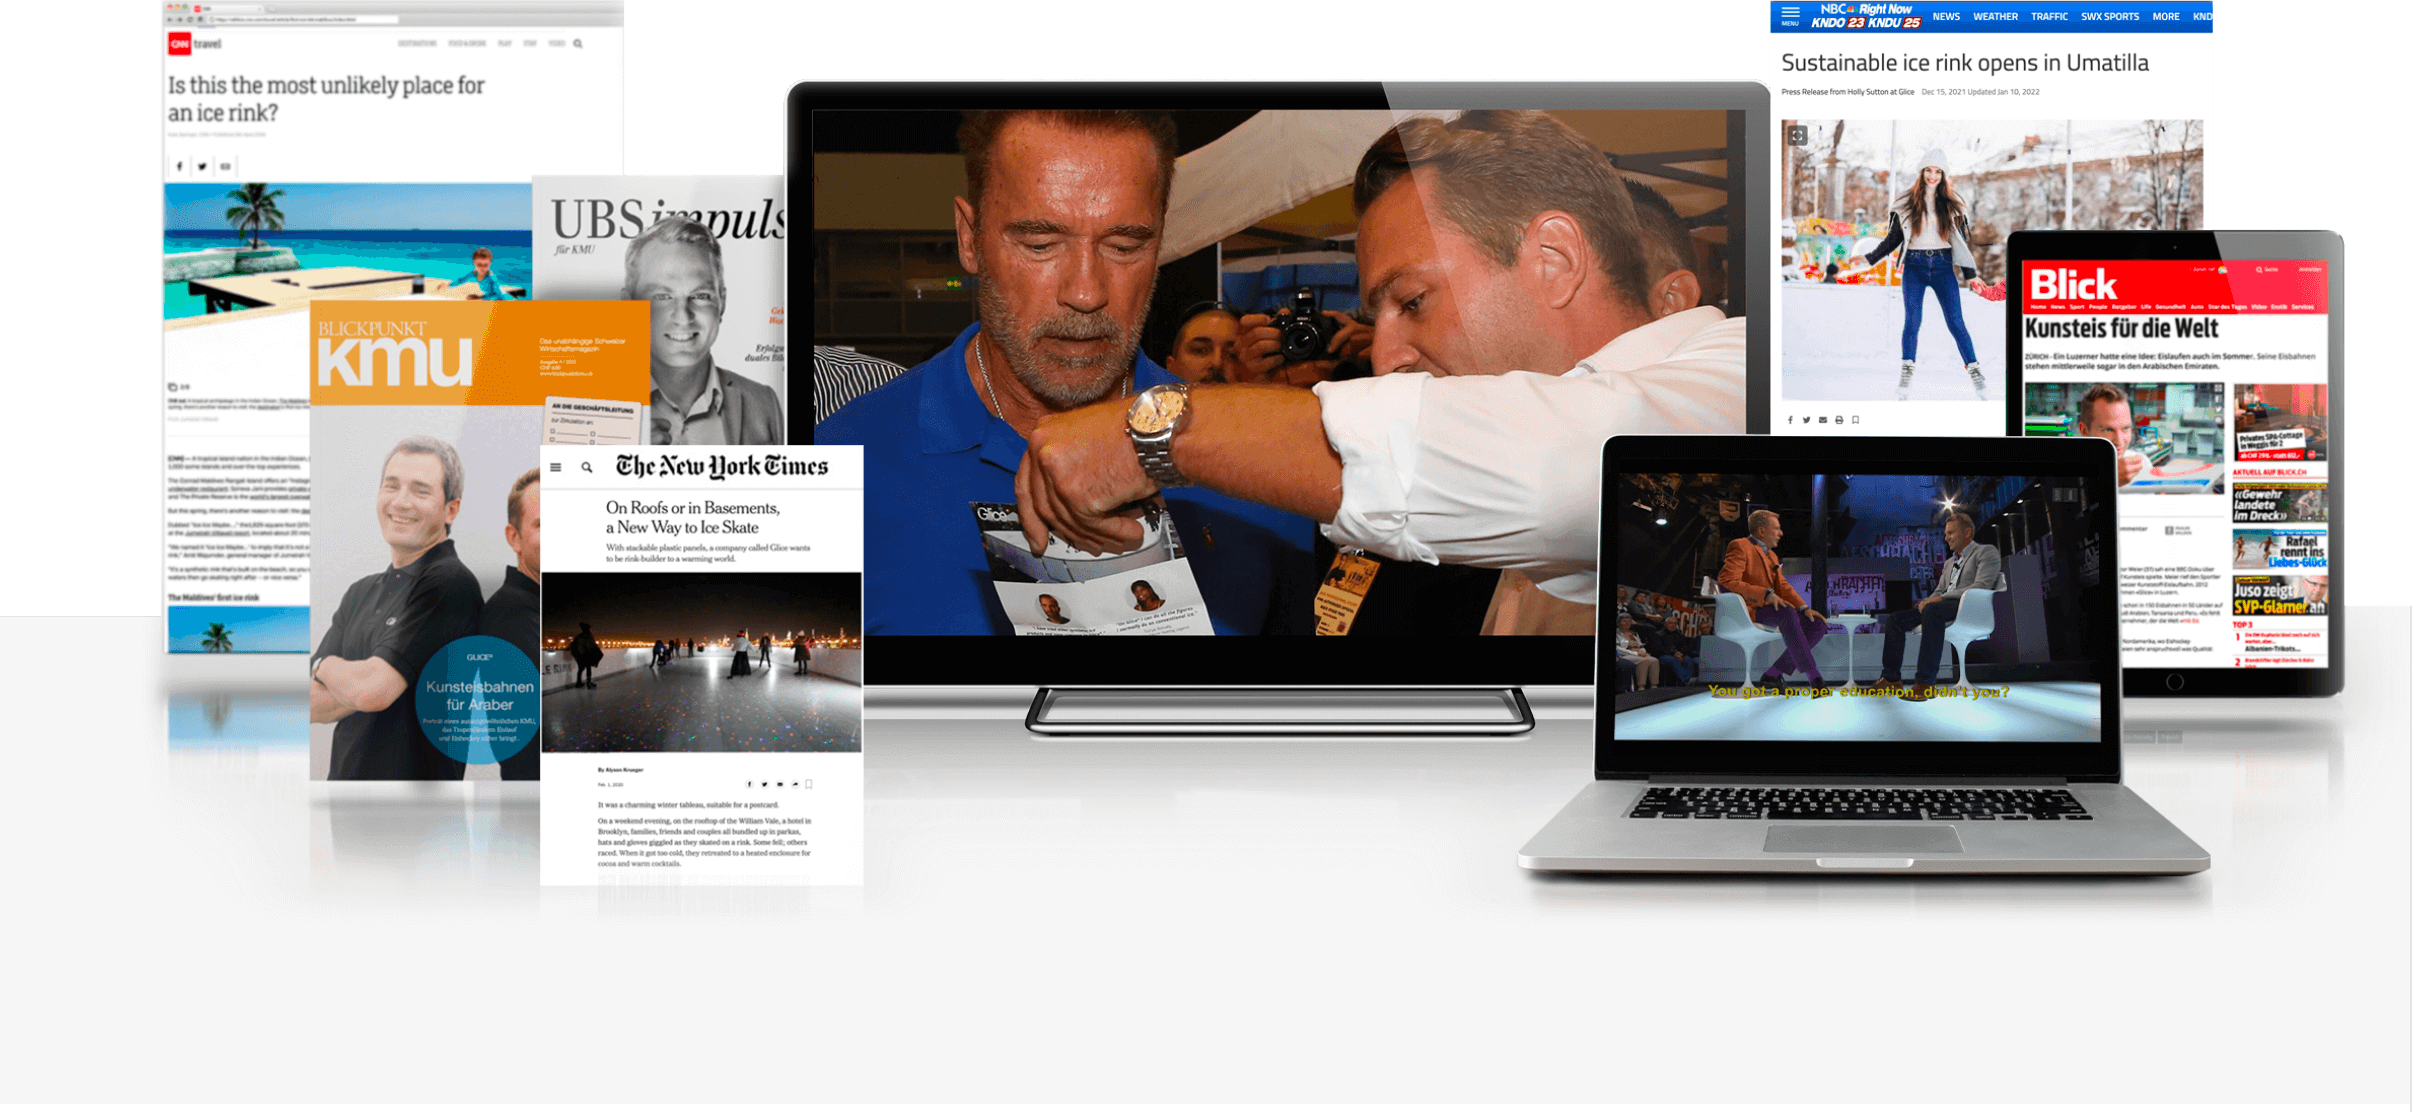 Collage of Glice featured in various media publications, including Viktor Meier with Arnold Schwartzenegger